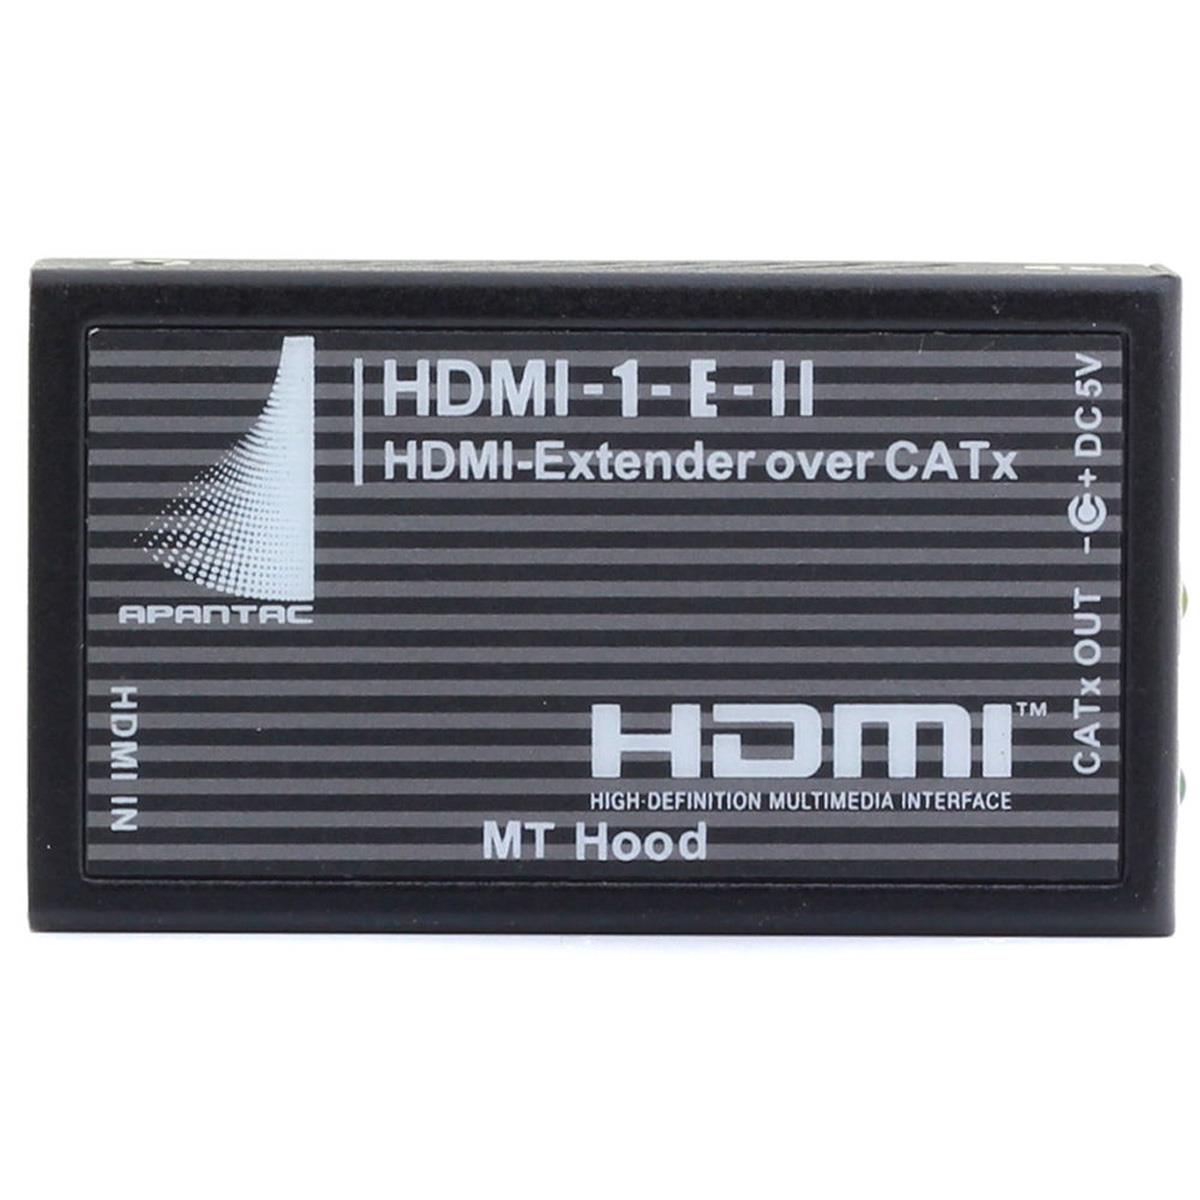 Picture of Apantac APA-HDMI-1-E-II Enhanced HDMI Extender Over CAT6 up to 150 ft. at 1920x1080p